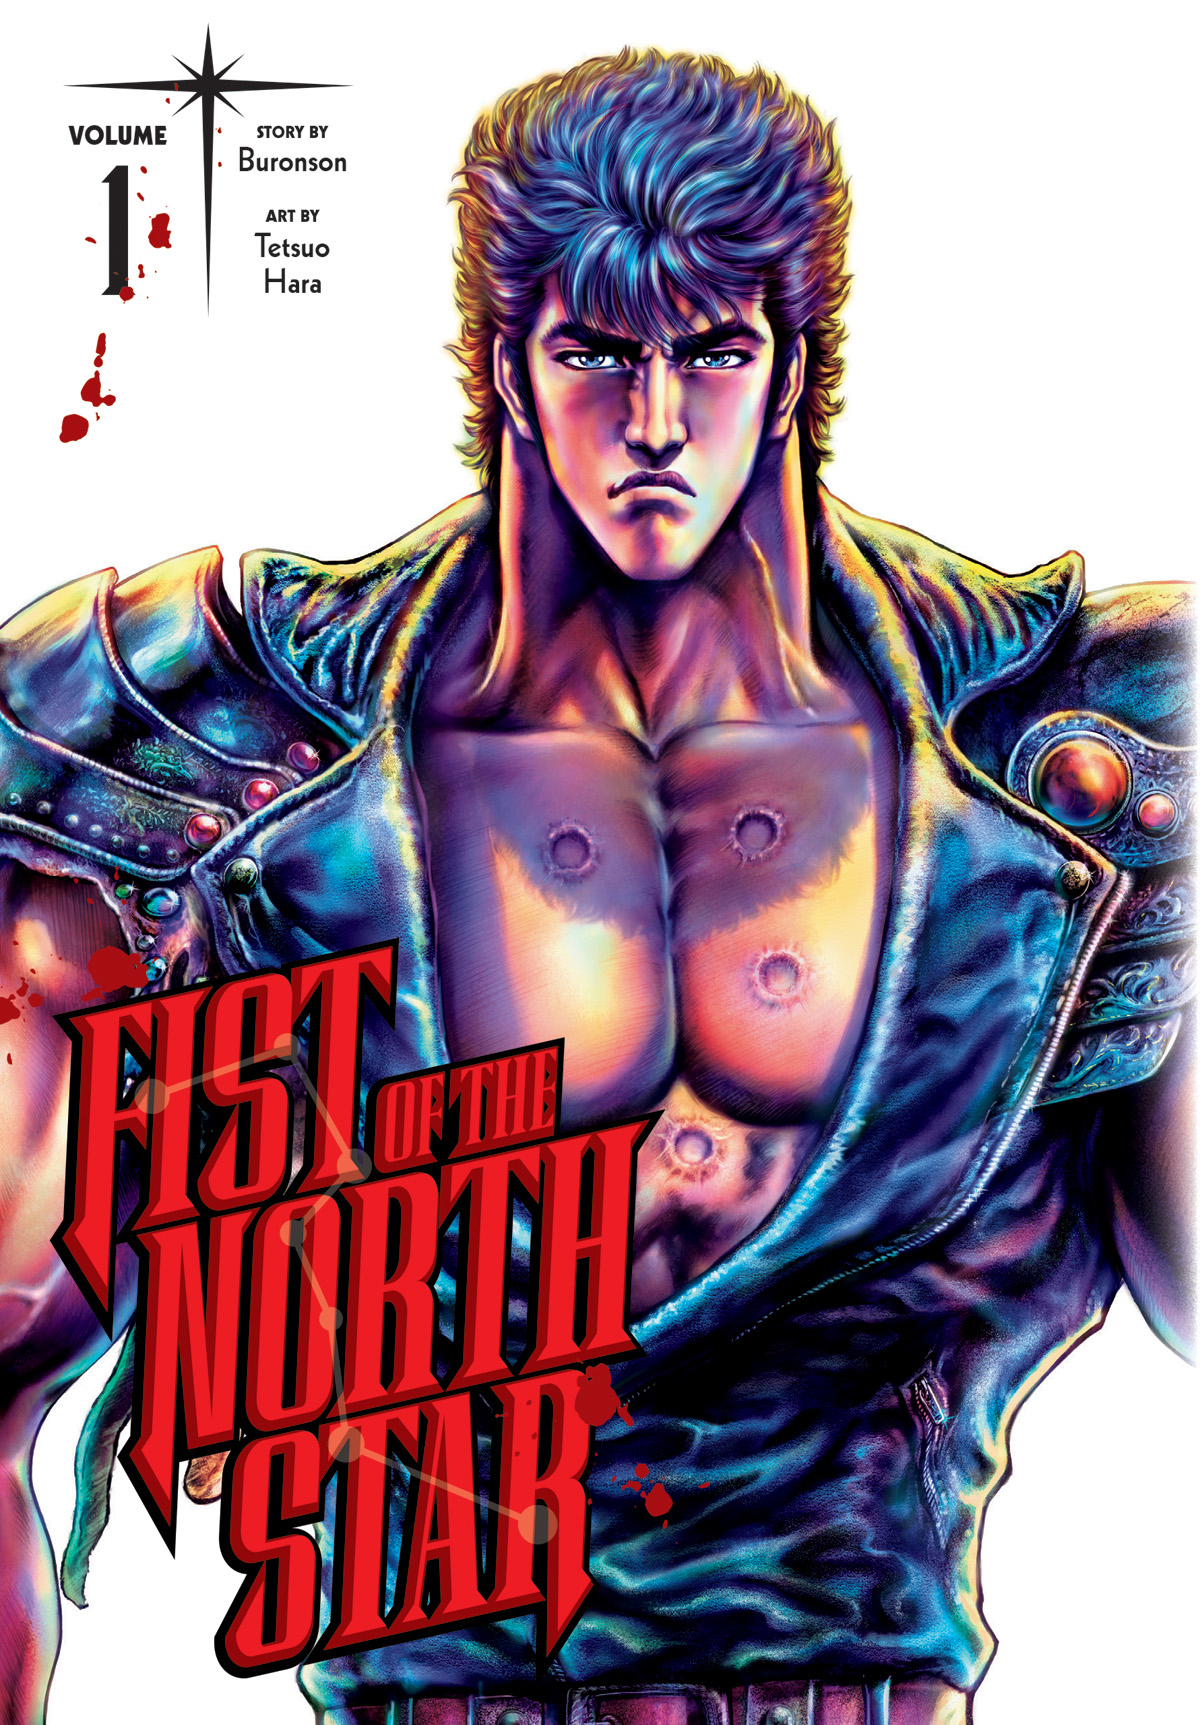 Fist of the North Star Graphic Novel Hardcover Volume 1